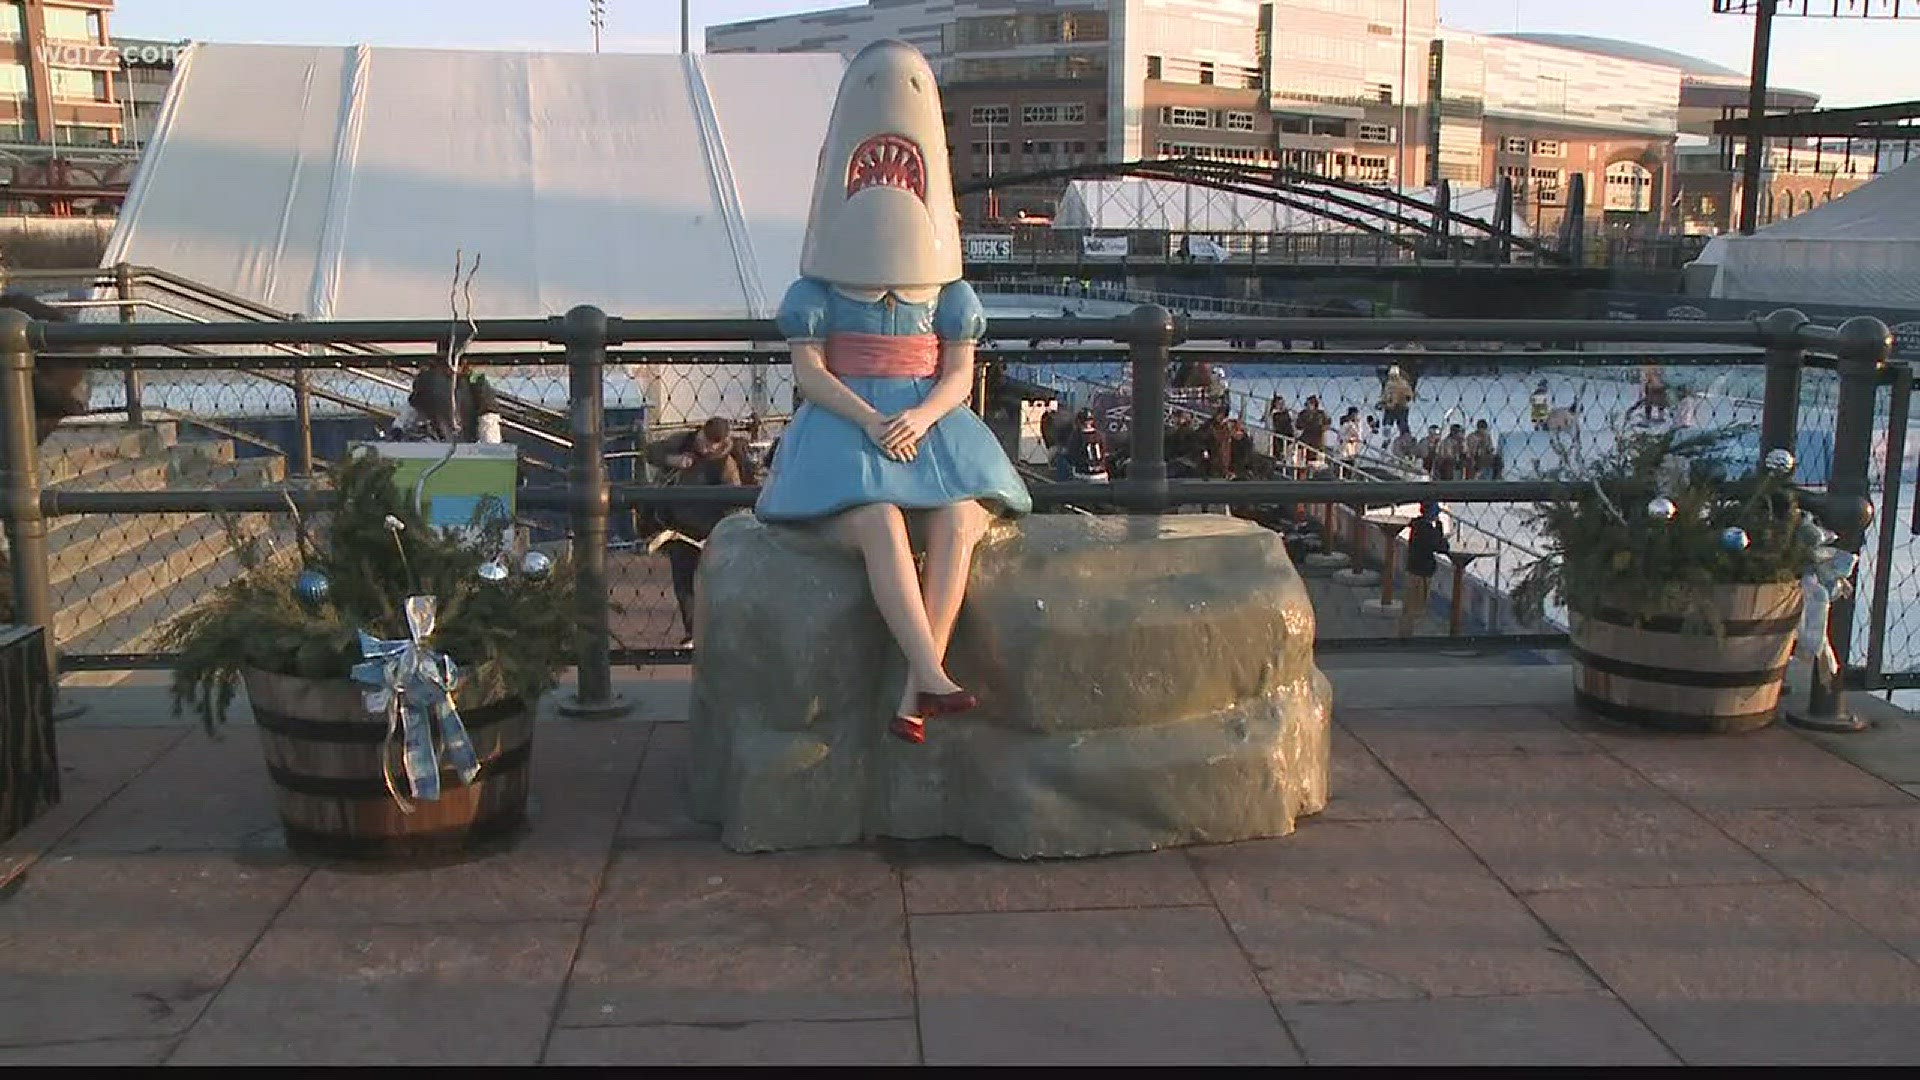 Shark Girl: The Sculpture's Rise To Fame